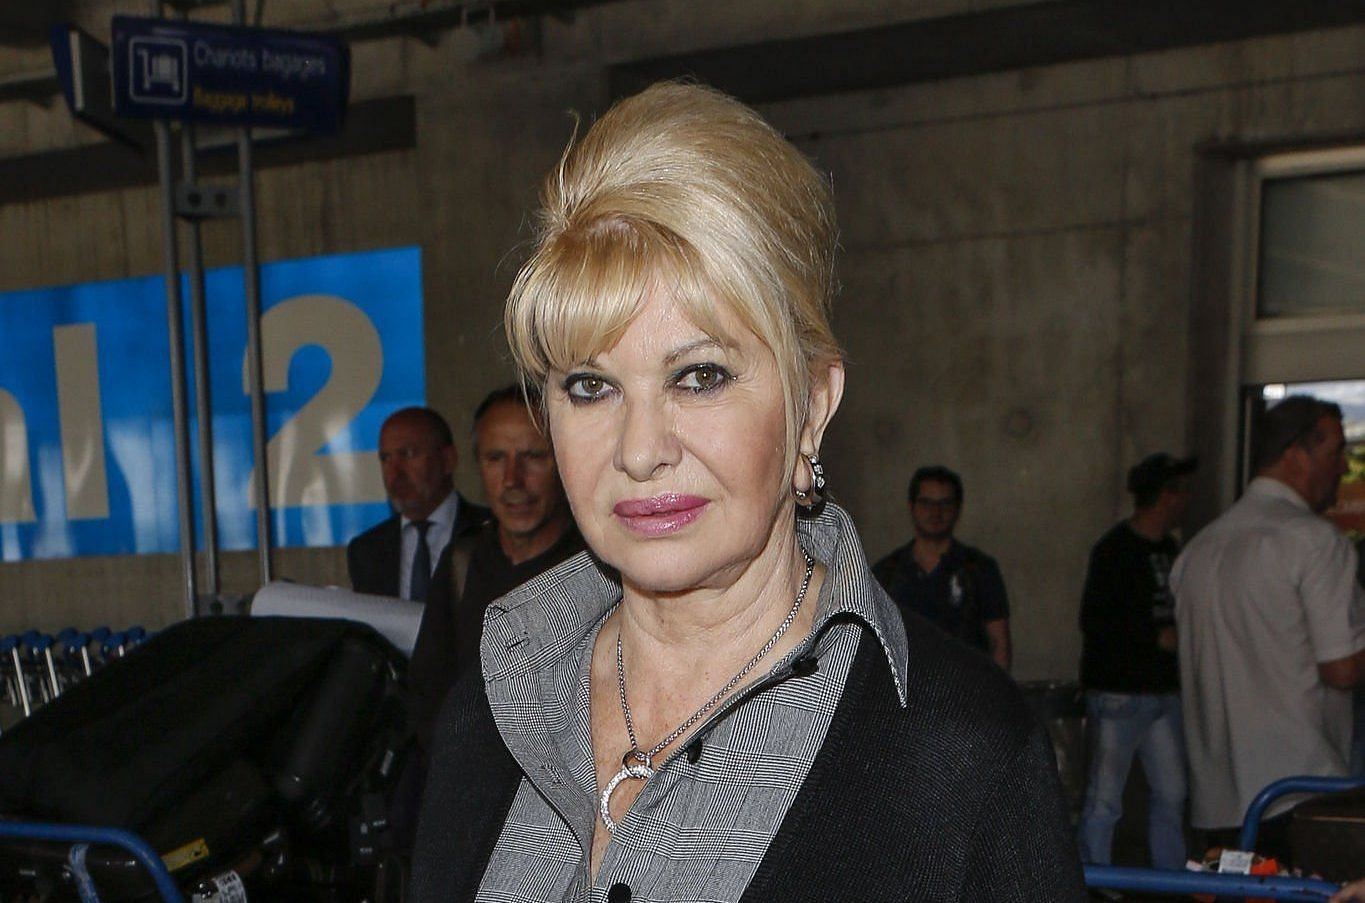 Ivana Trump died due to blunt force injury (Image via Getty Images)